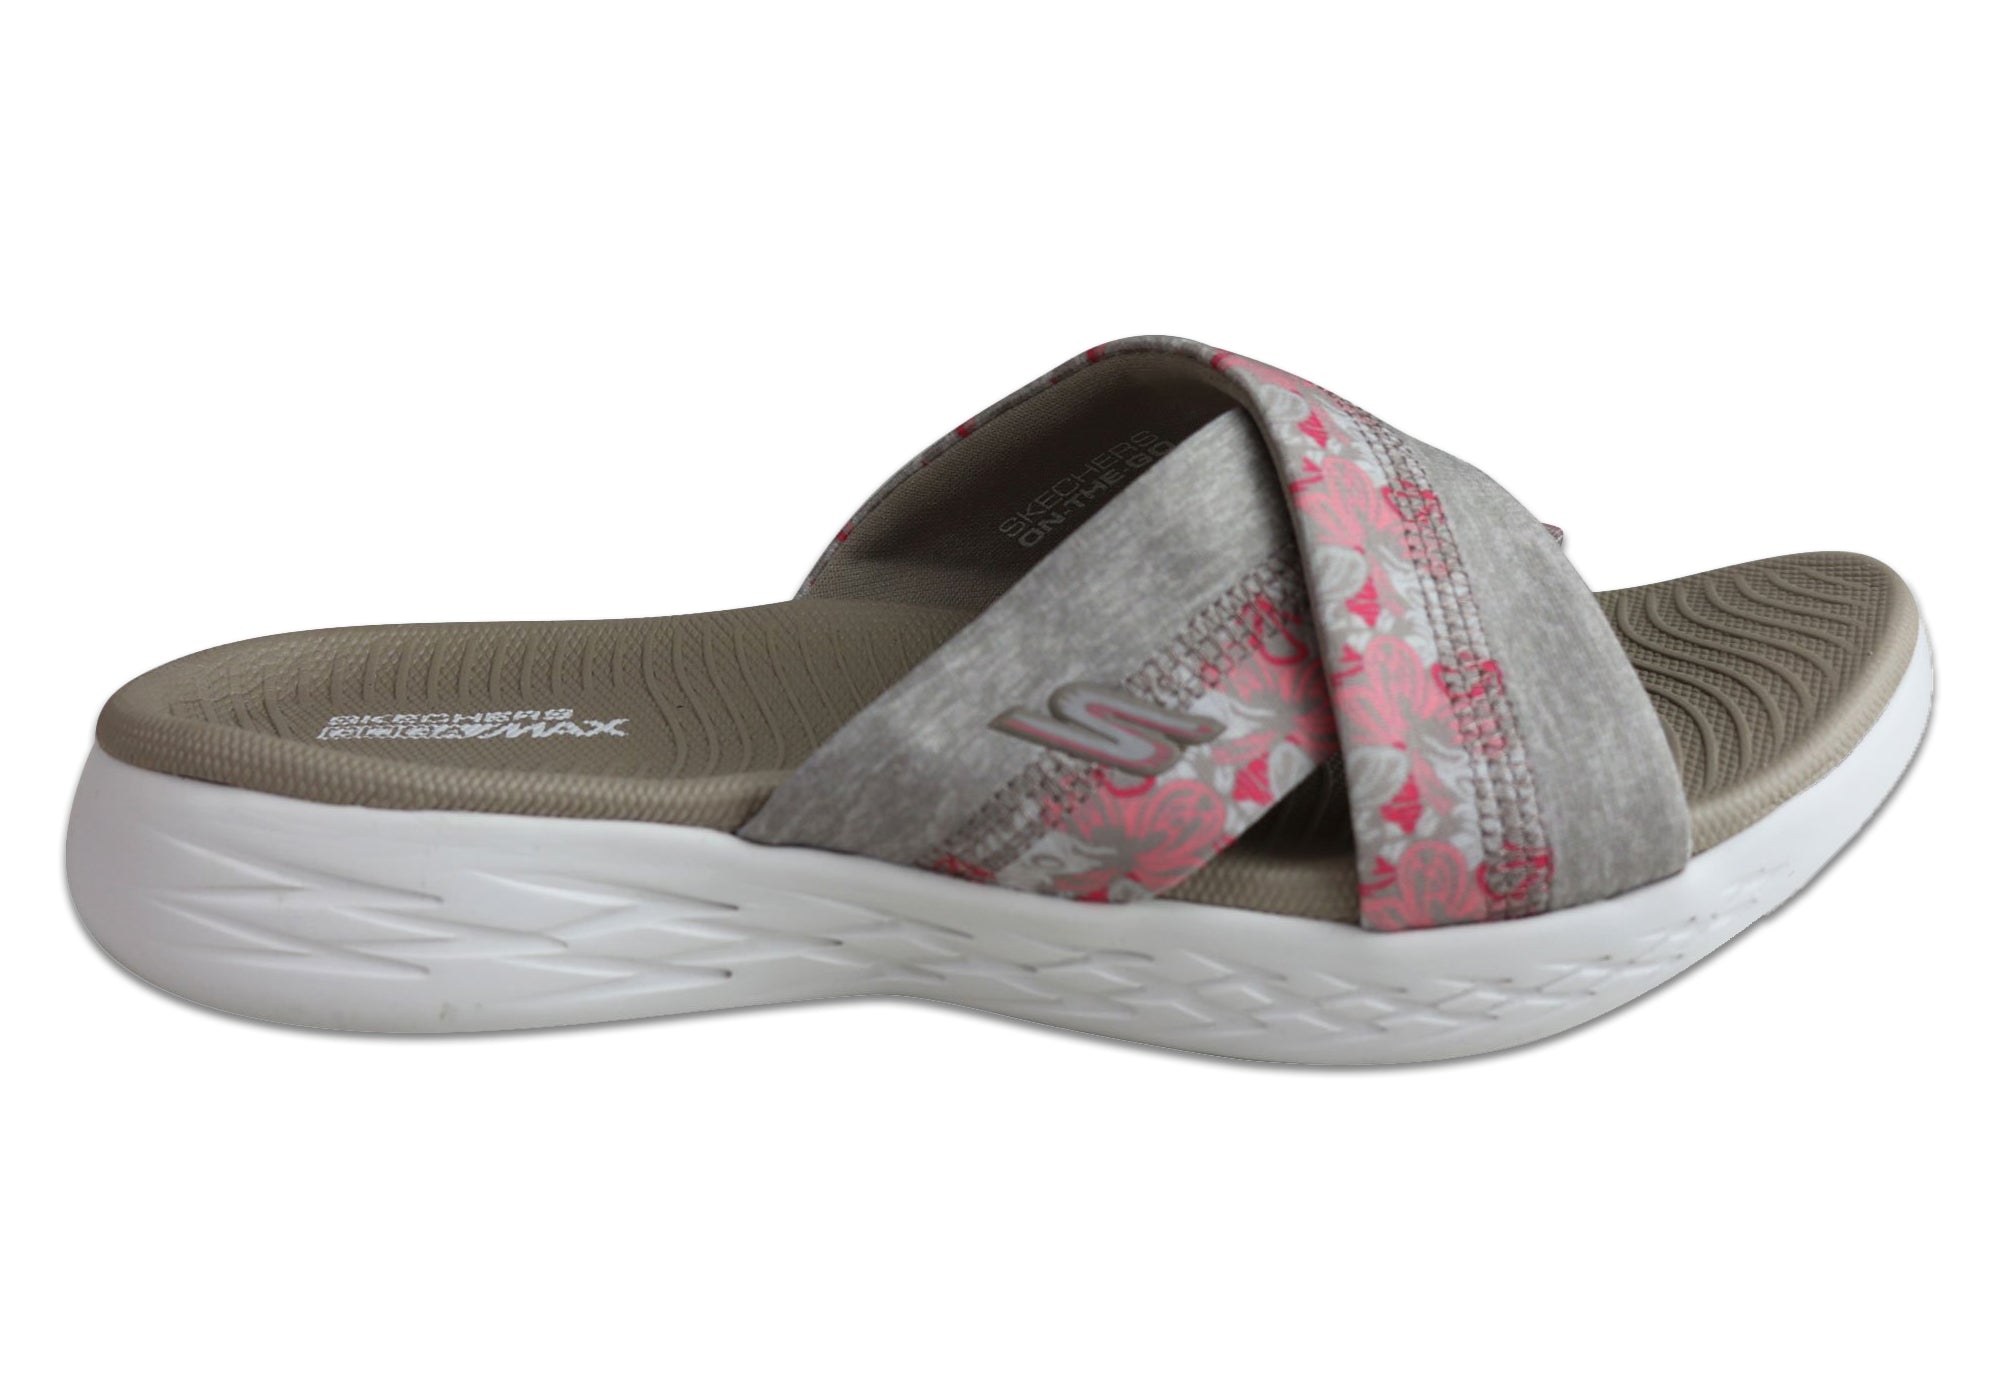 skechers sandals discontinued styles